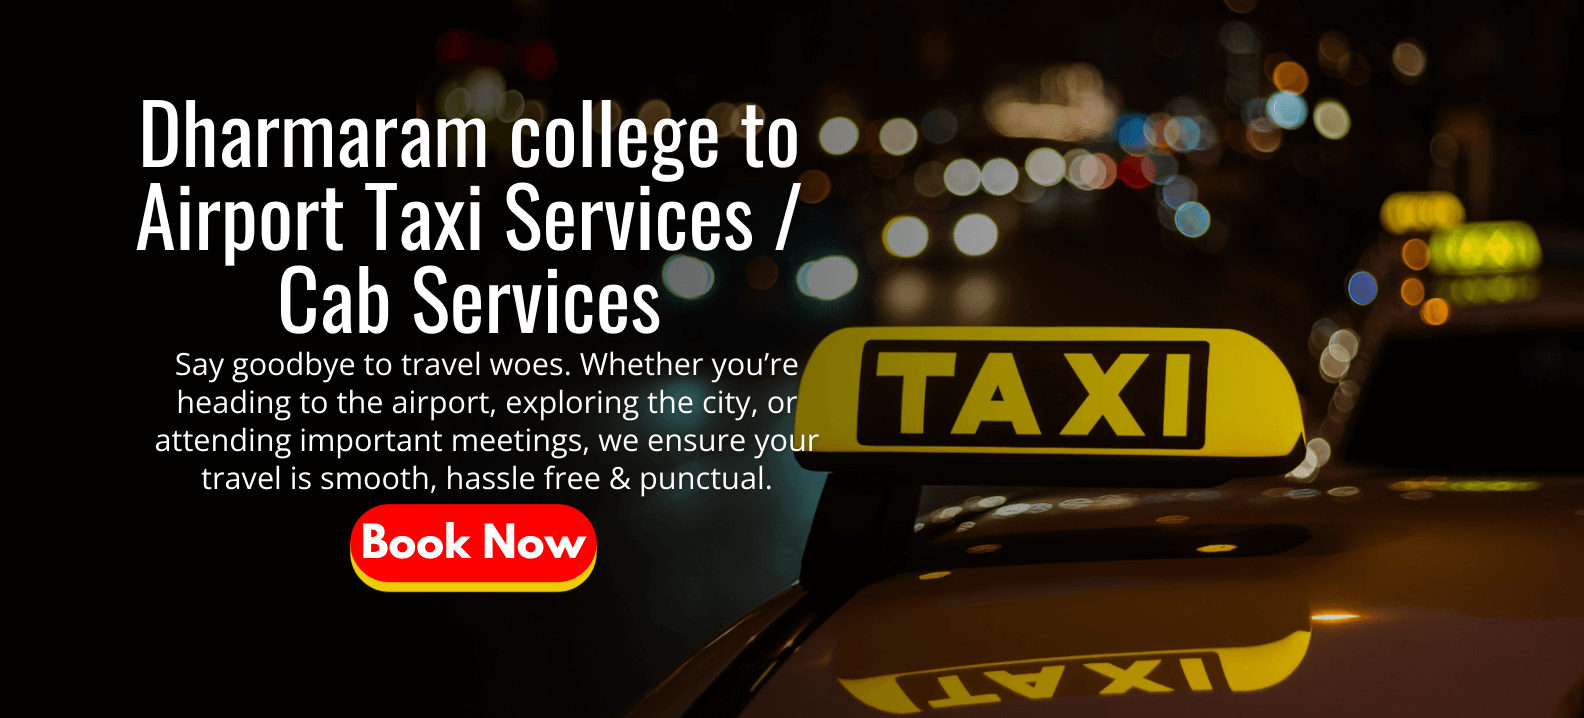 Dharmaram college to Airport Taxi Services _ Cab Services